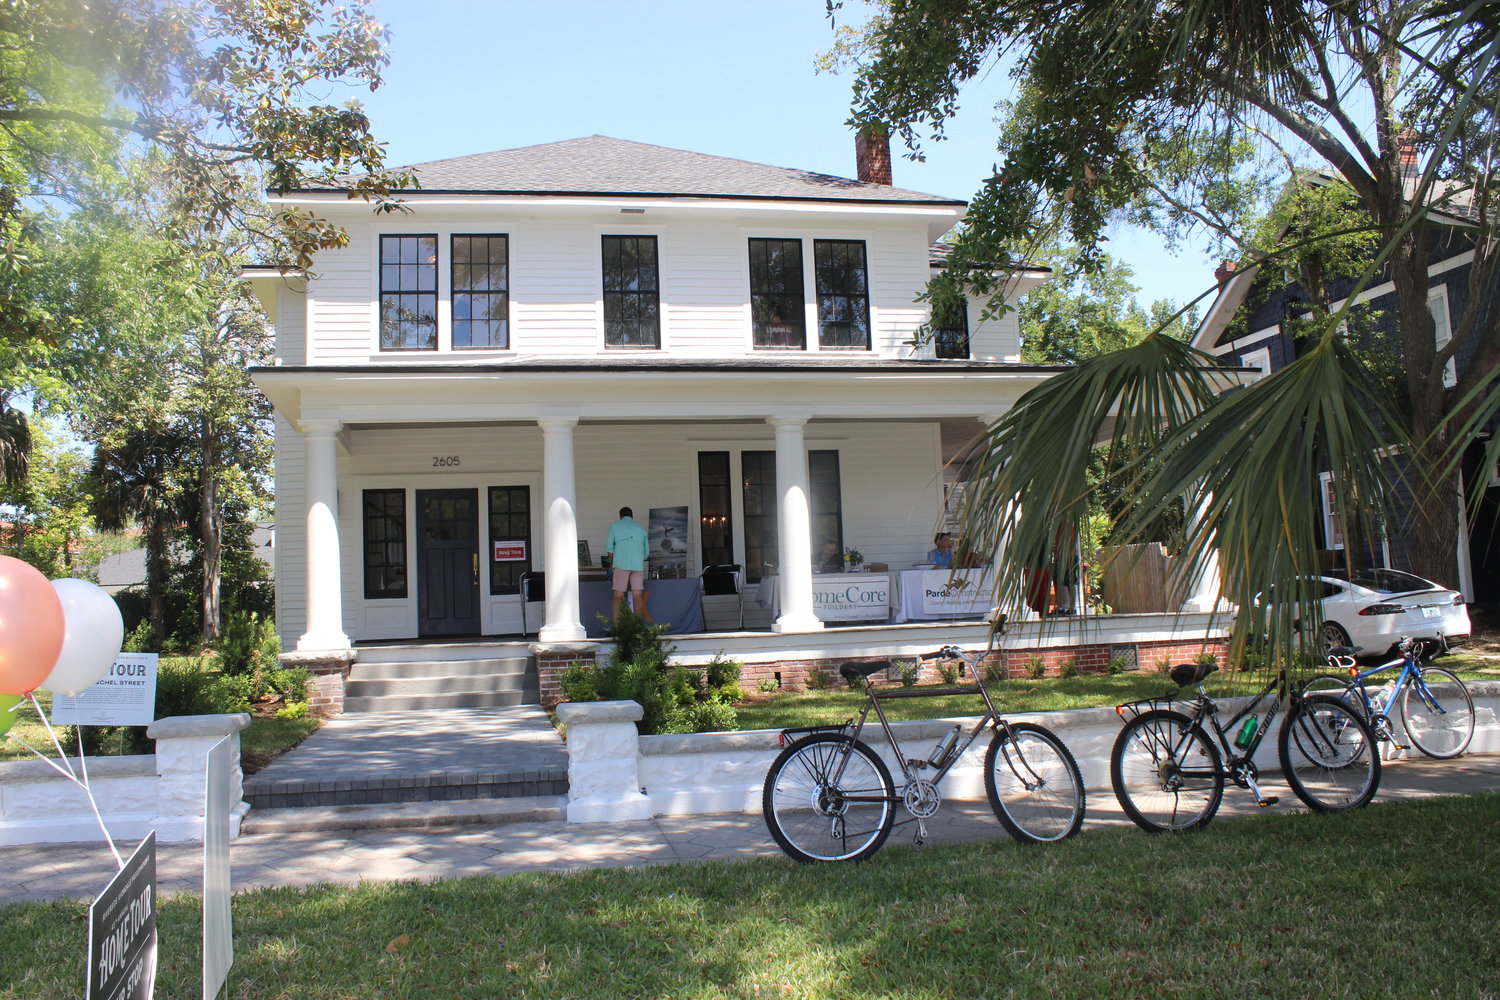 A look at the Riverside Avondale Preservation’s 2019 Spring Home Tour